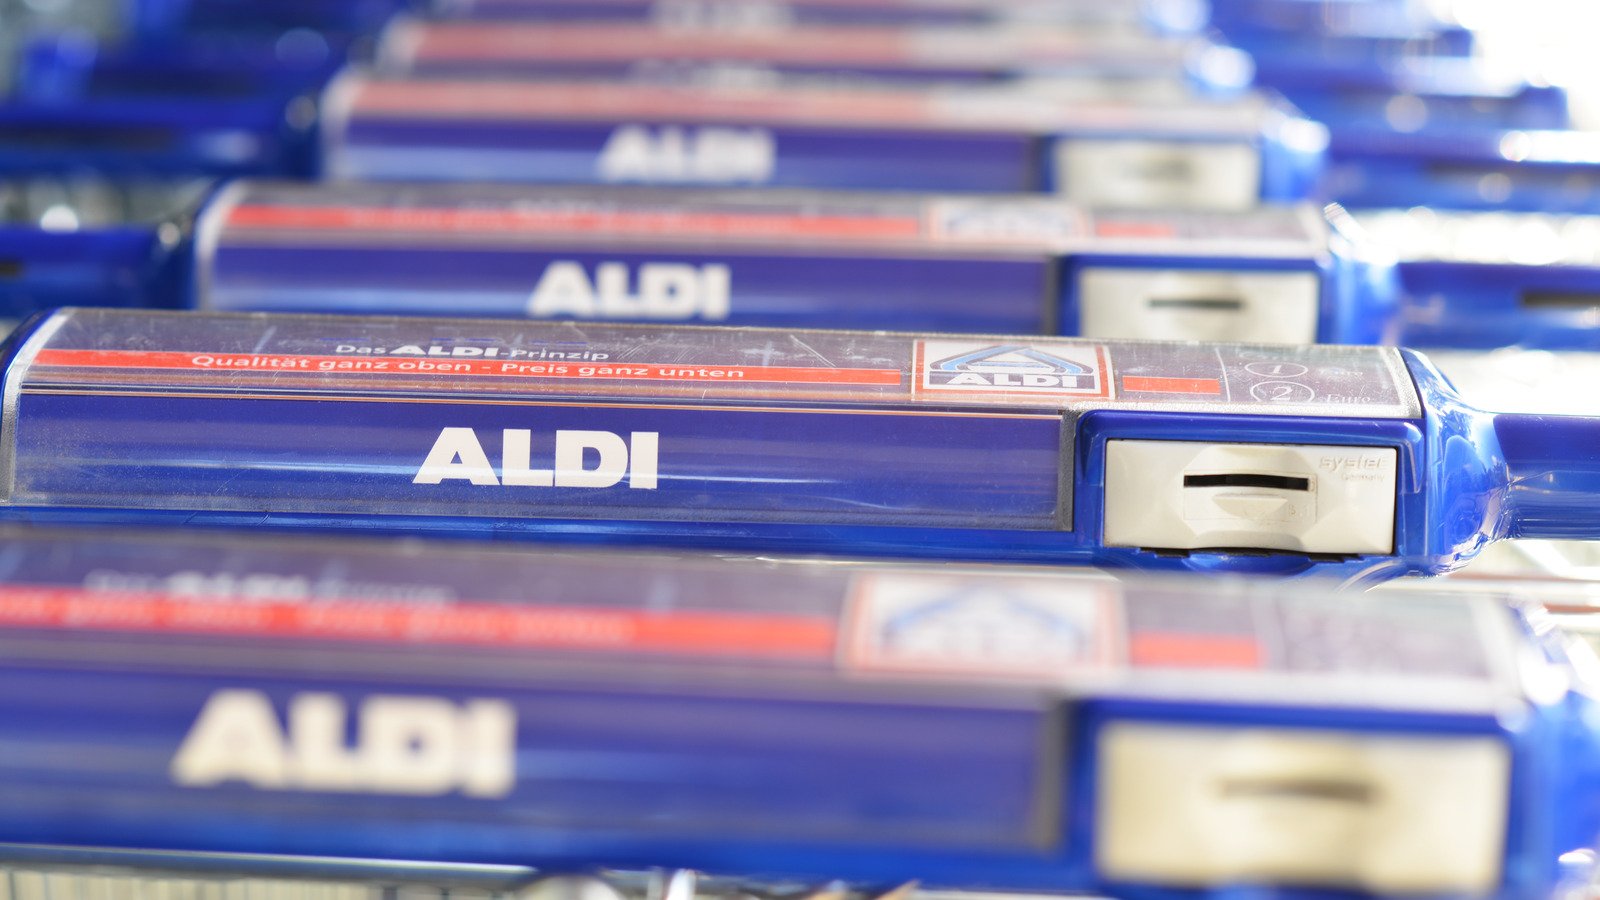 Aldi Shoppers Are Relating To This Hilarious Reddit Post - Mashed